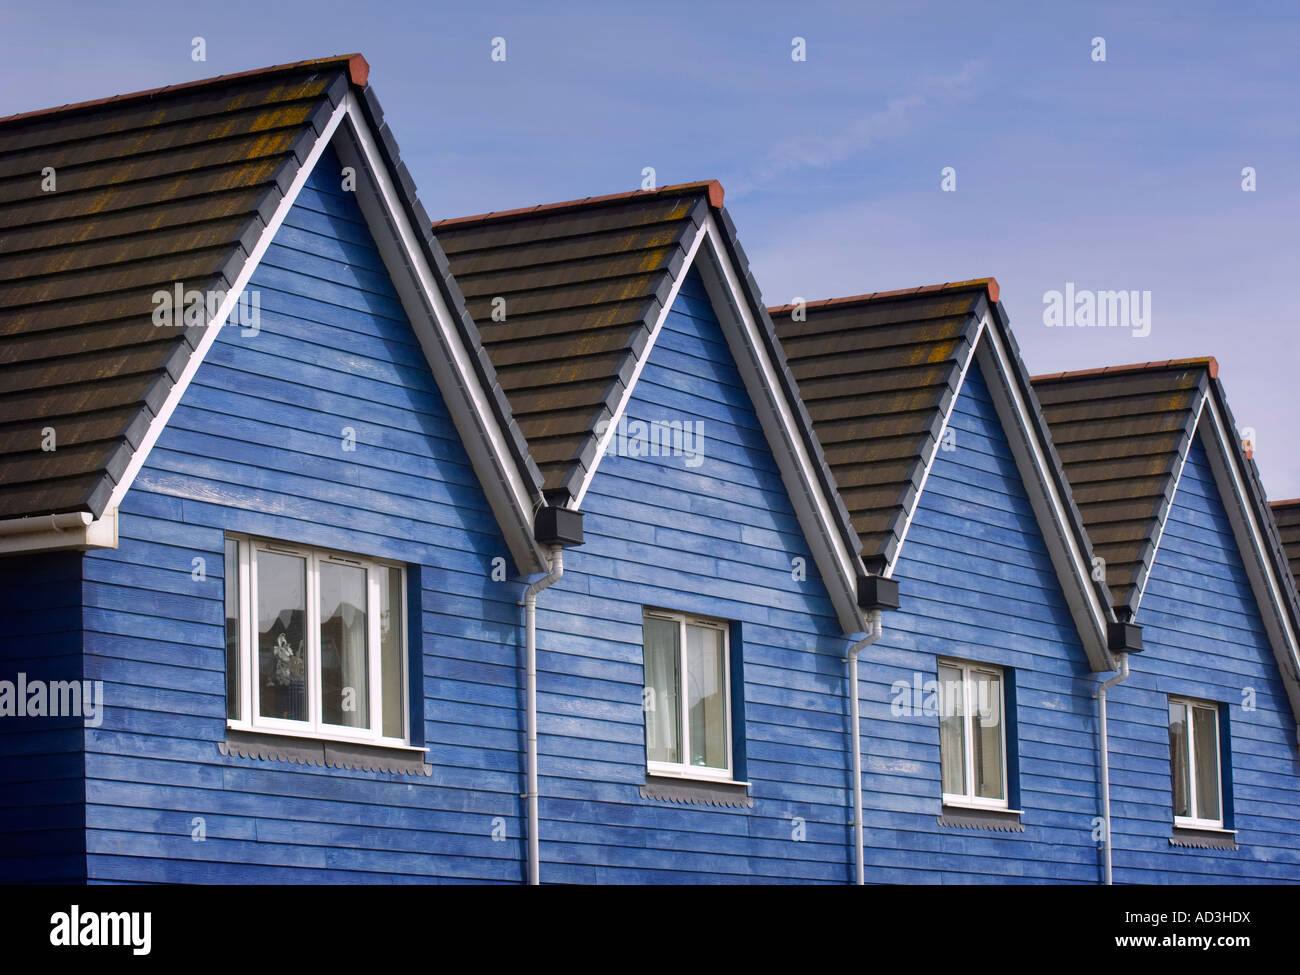 Blue weatherboarded wharf-style new build housing at a quayside development in East Sussex. UK. Stock Photo